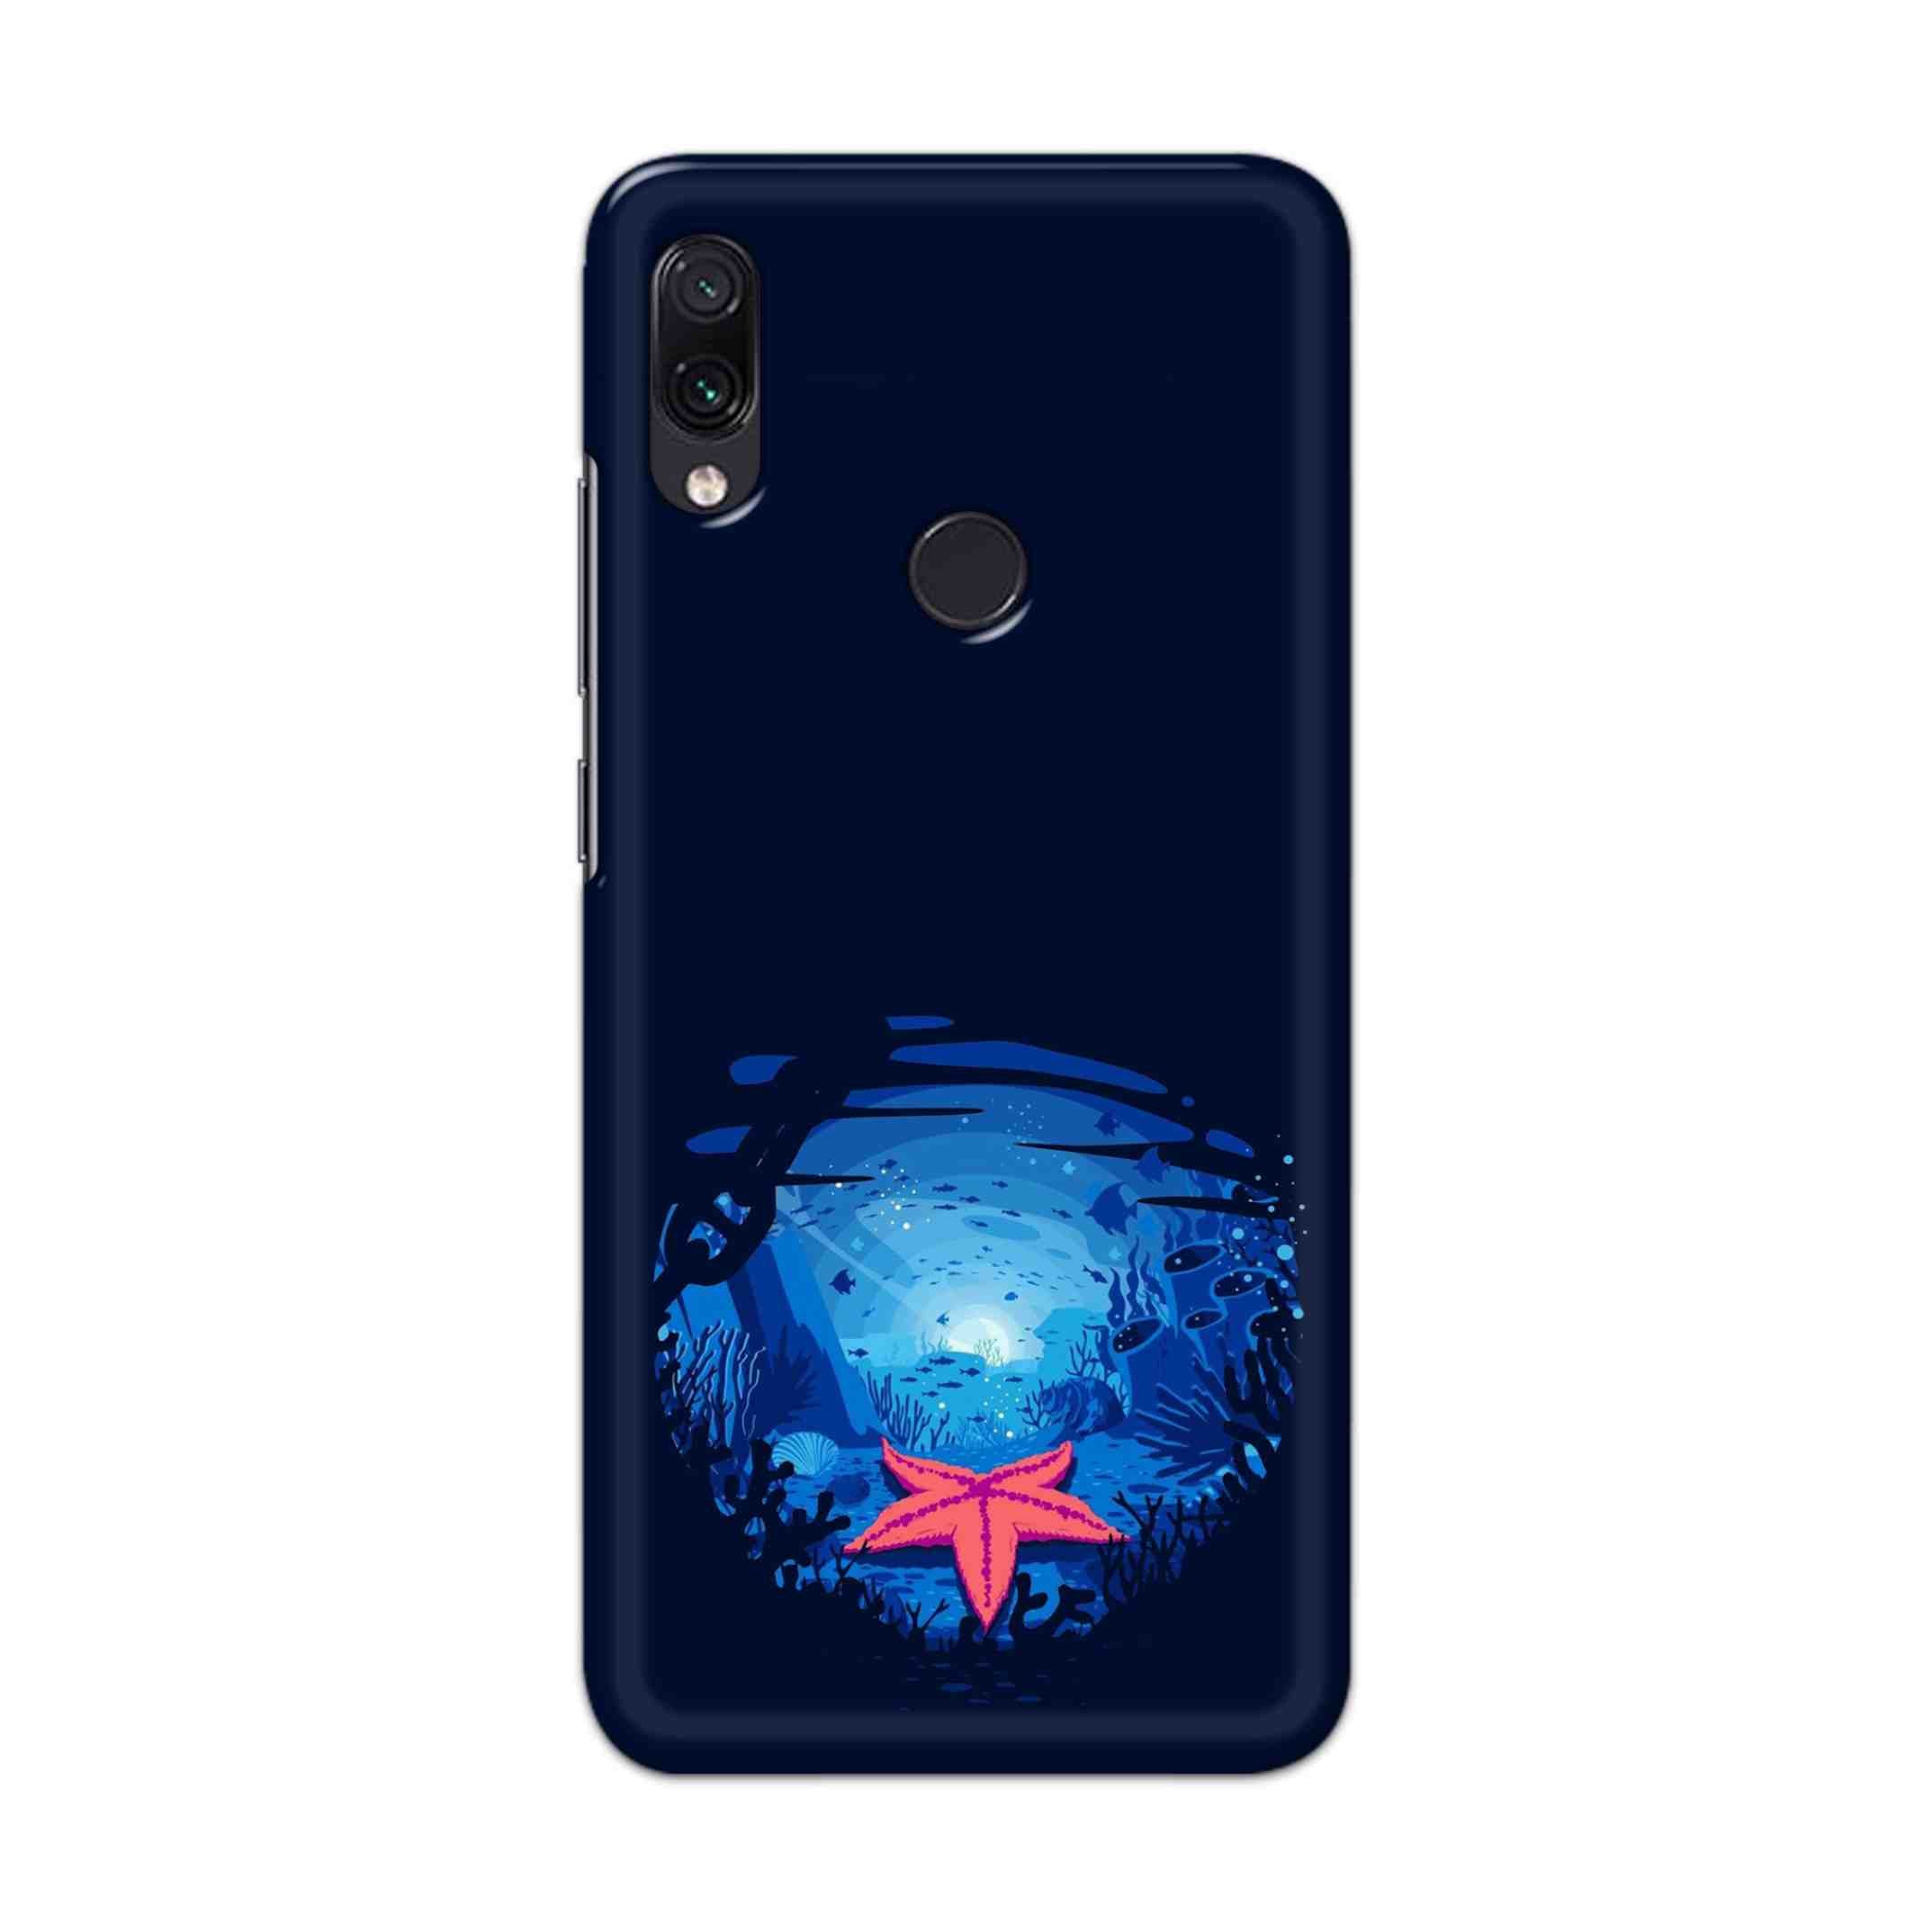 Buy Star Fresh Hard Back Mobile Phone Case Cover For Xiaomi Redmi 7 Online